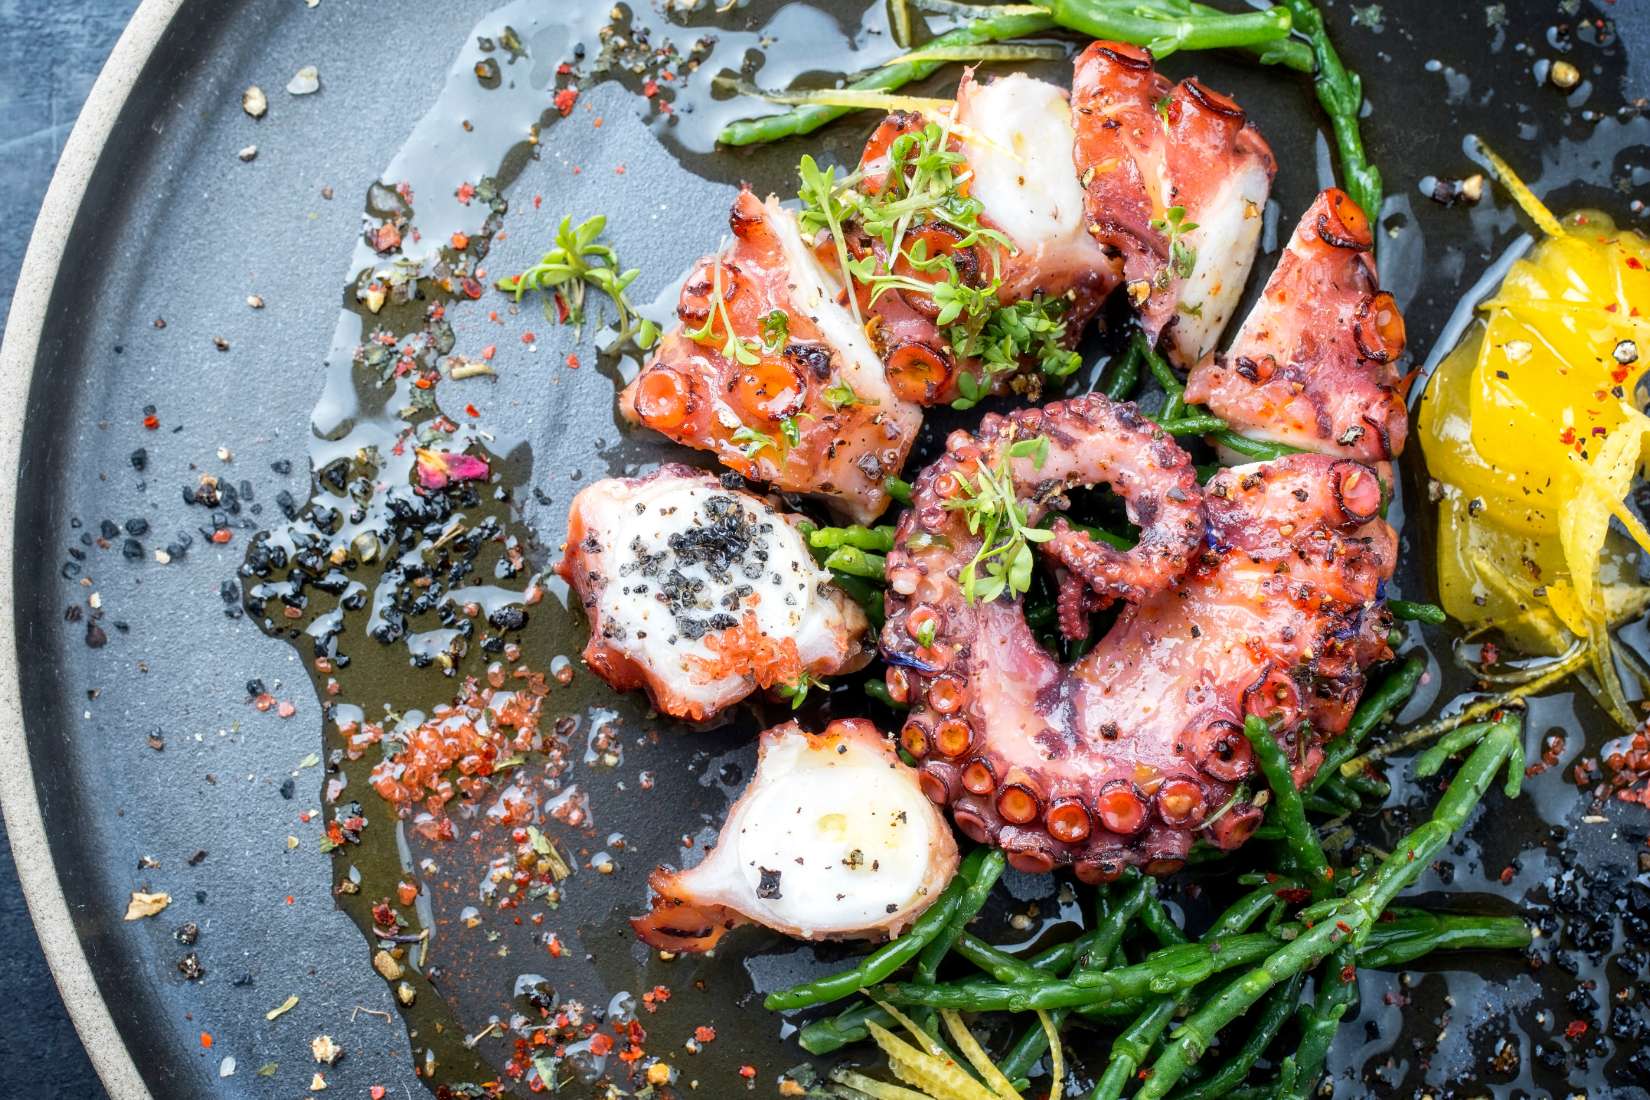 Octopus on slate with herbs and spices.